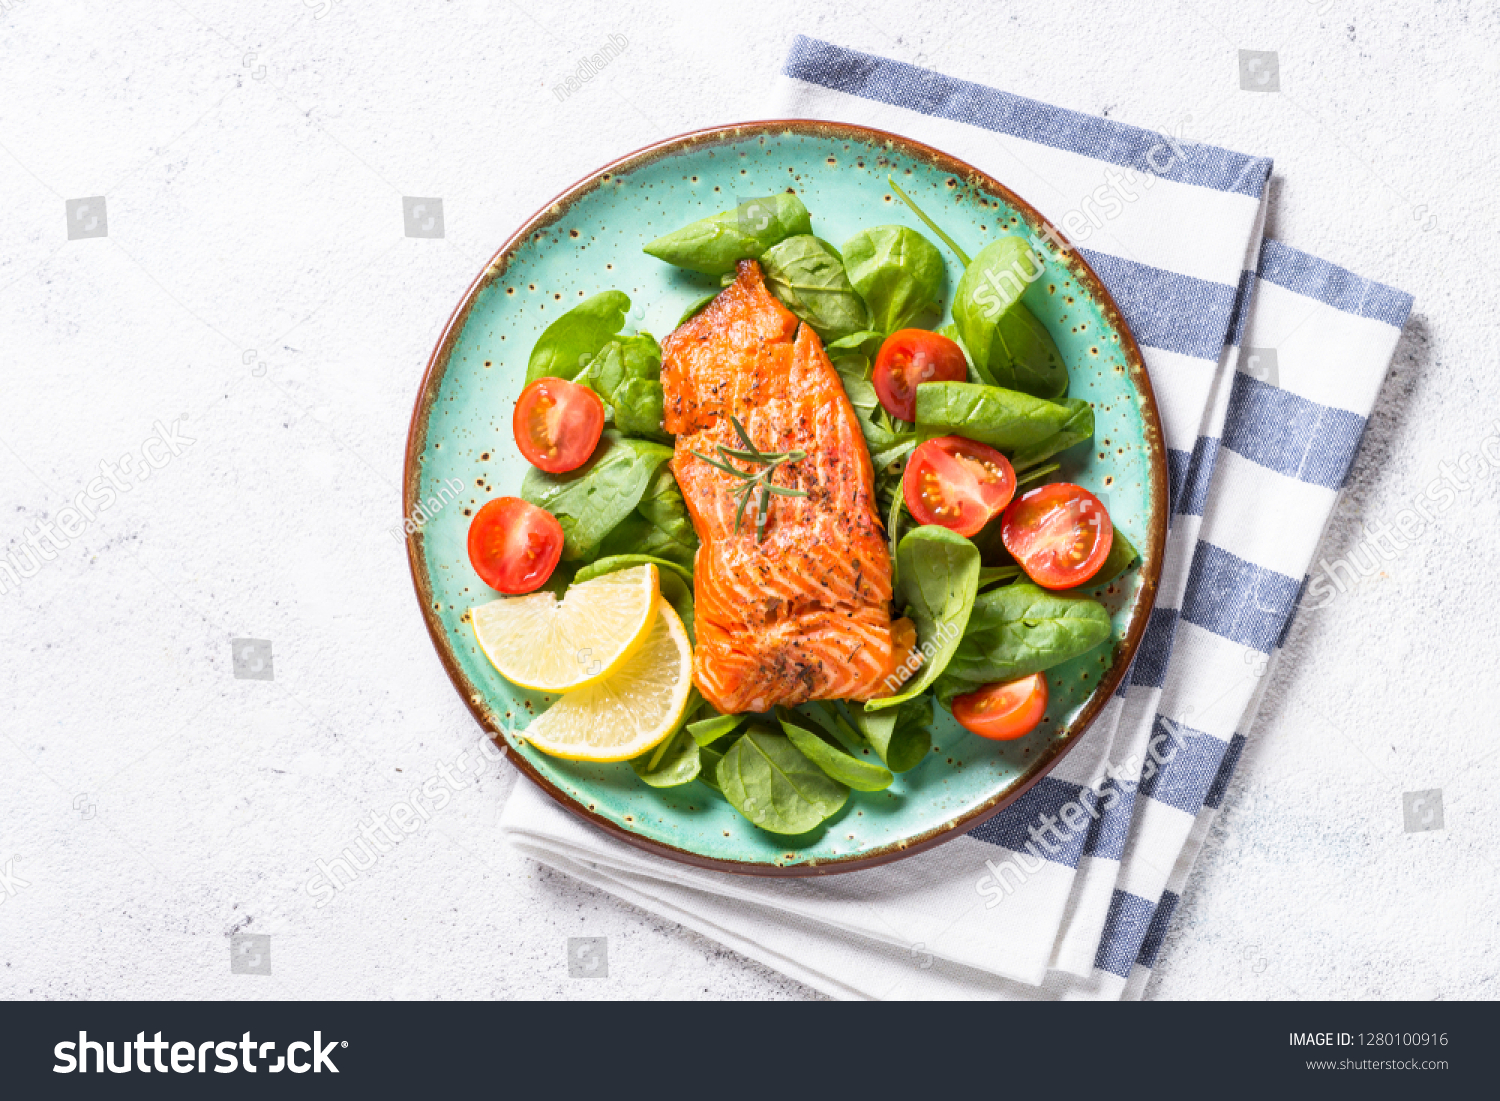 146,984 Plate fish top view Images, Stock Photos & Vectors | Shutterstock